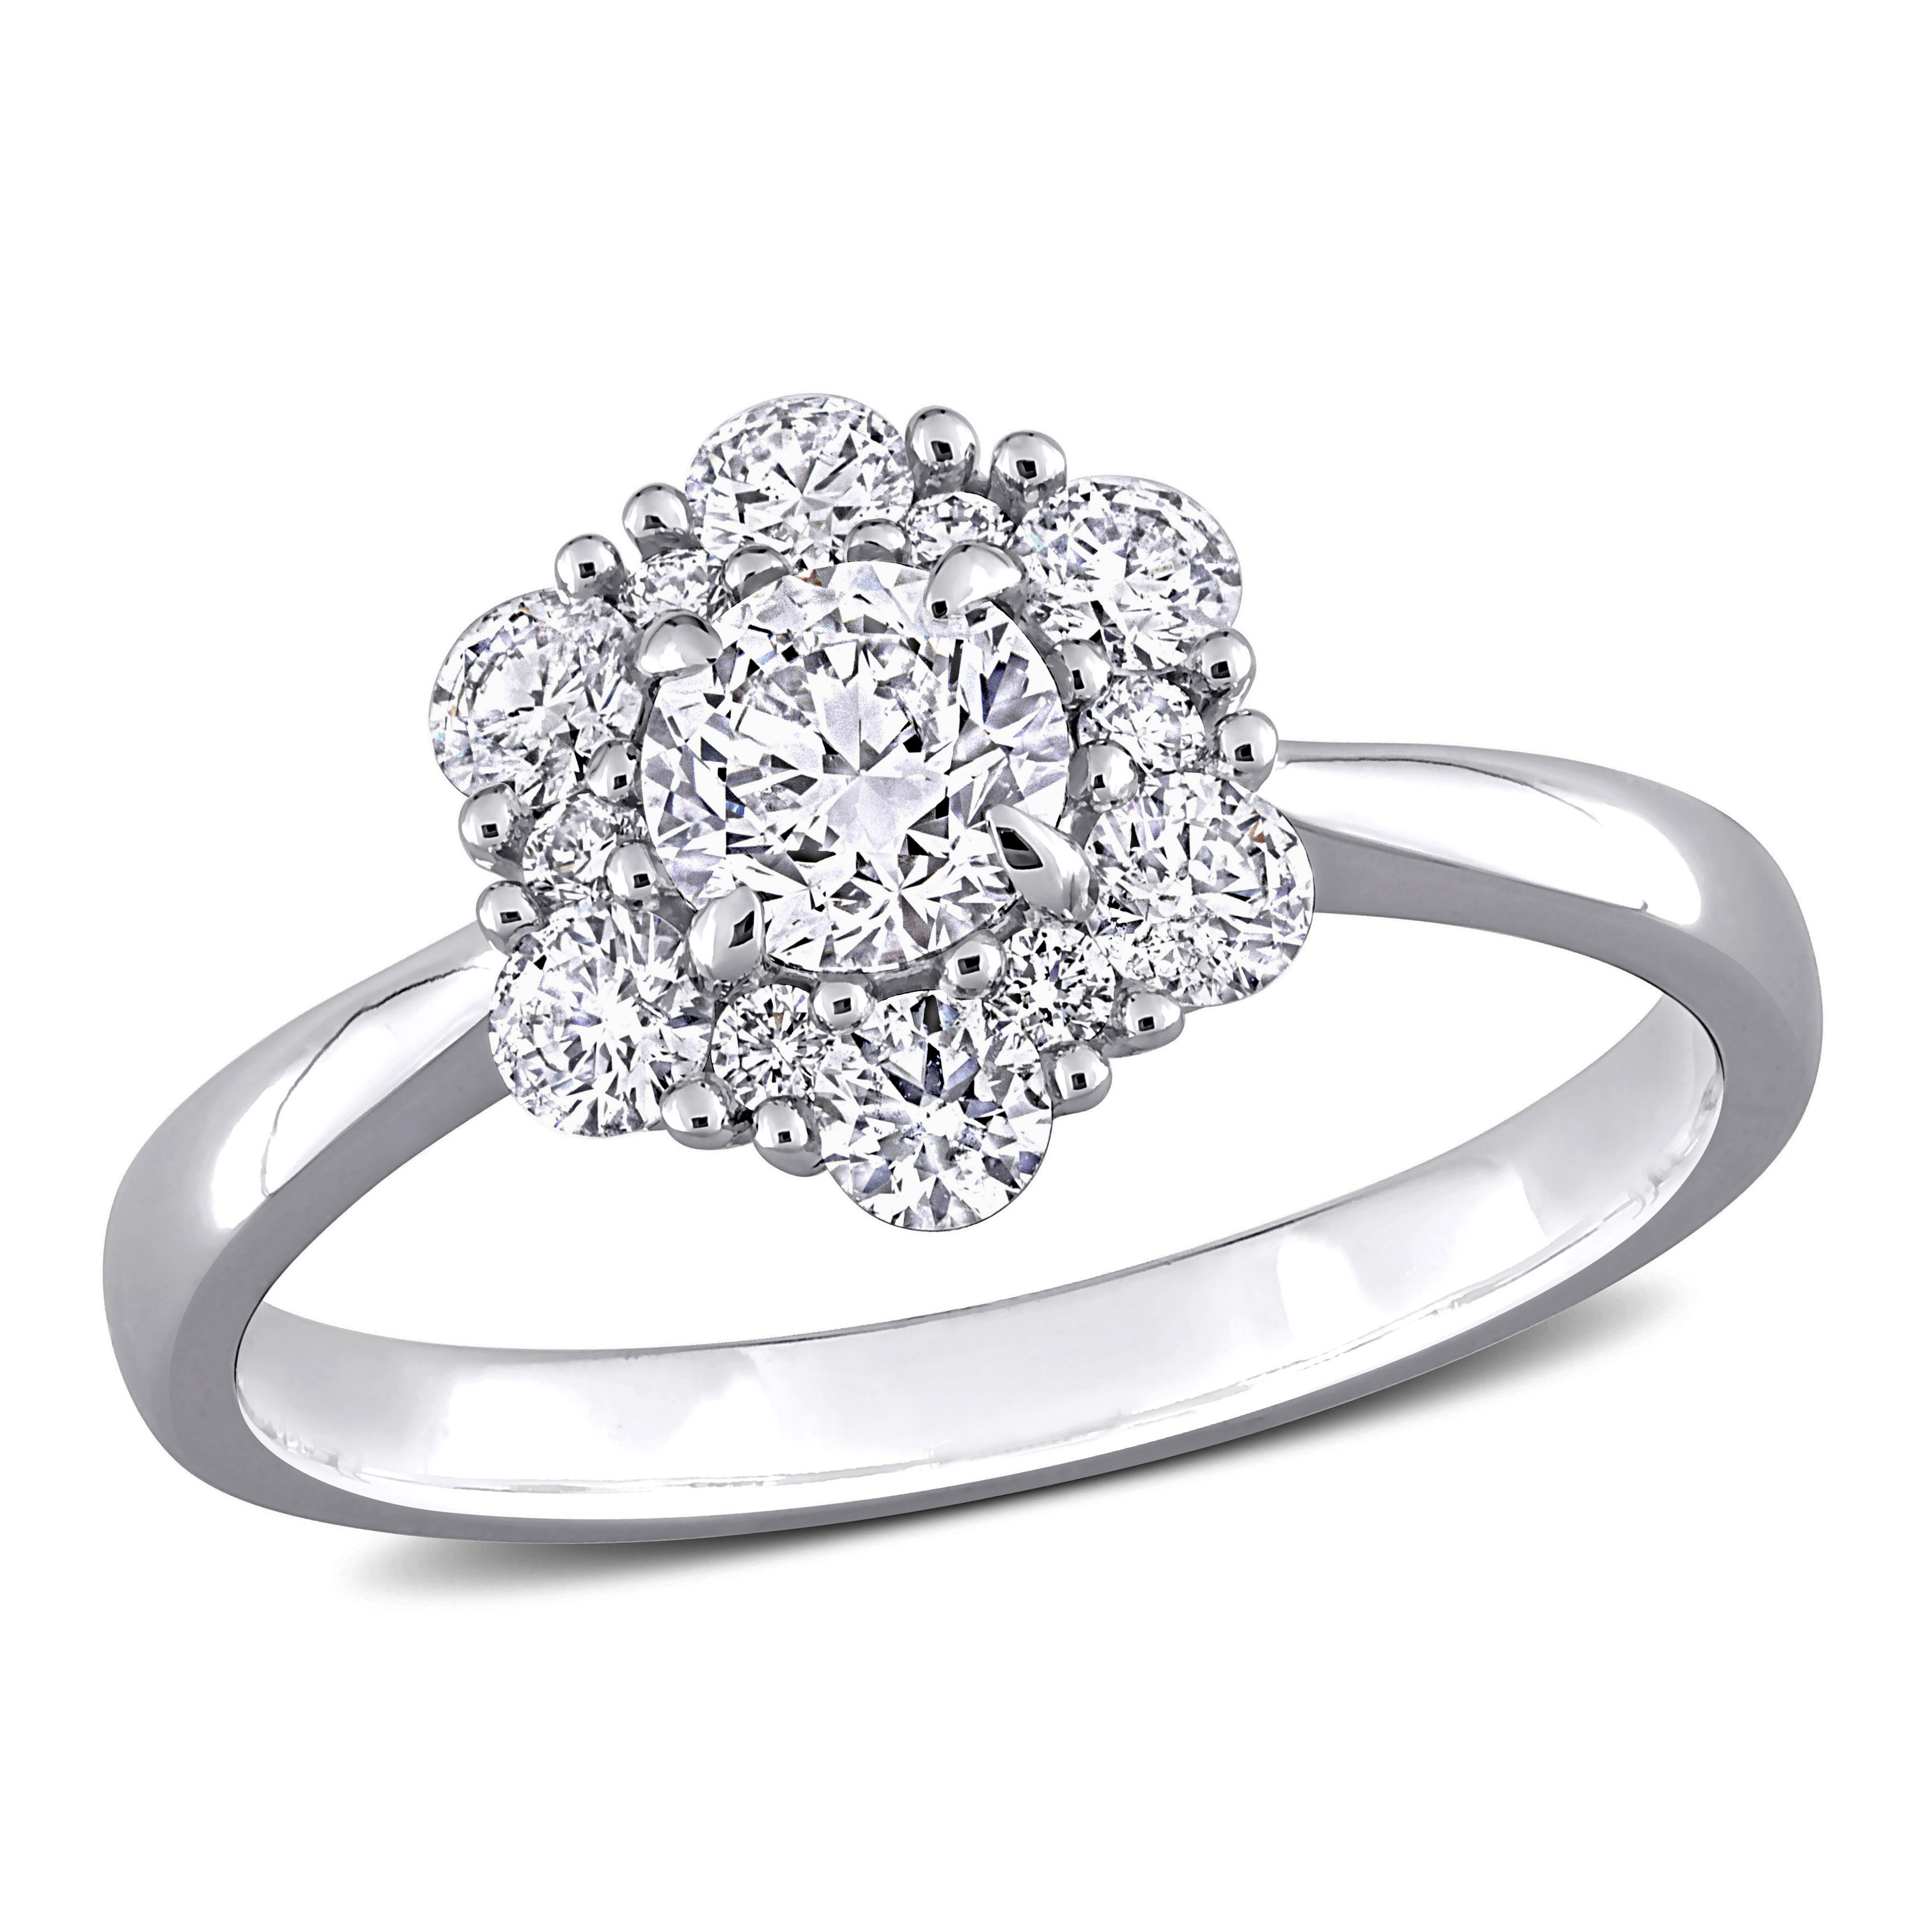 1 CT TW Diamond Cluster Engagement Ring in 14k White Gold